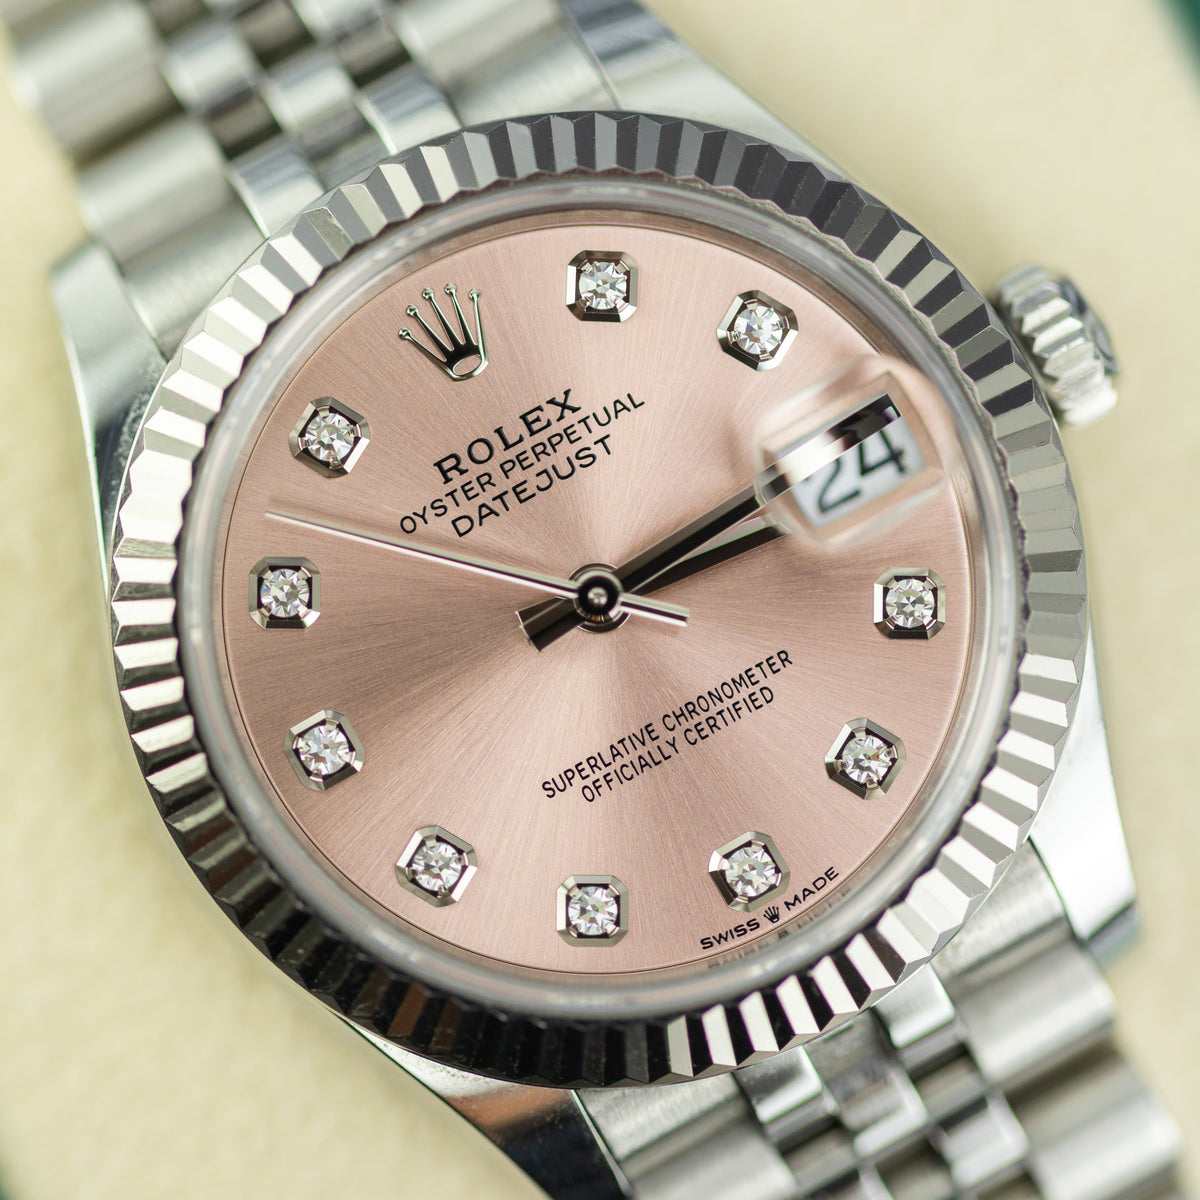 2022 Rolex DATEJUST 31mm Oystersteel & White Gold, Fluted Bezel, Pink Dial at RR Jewellers Yarm